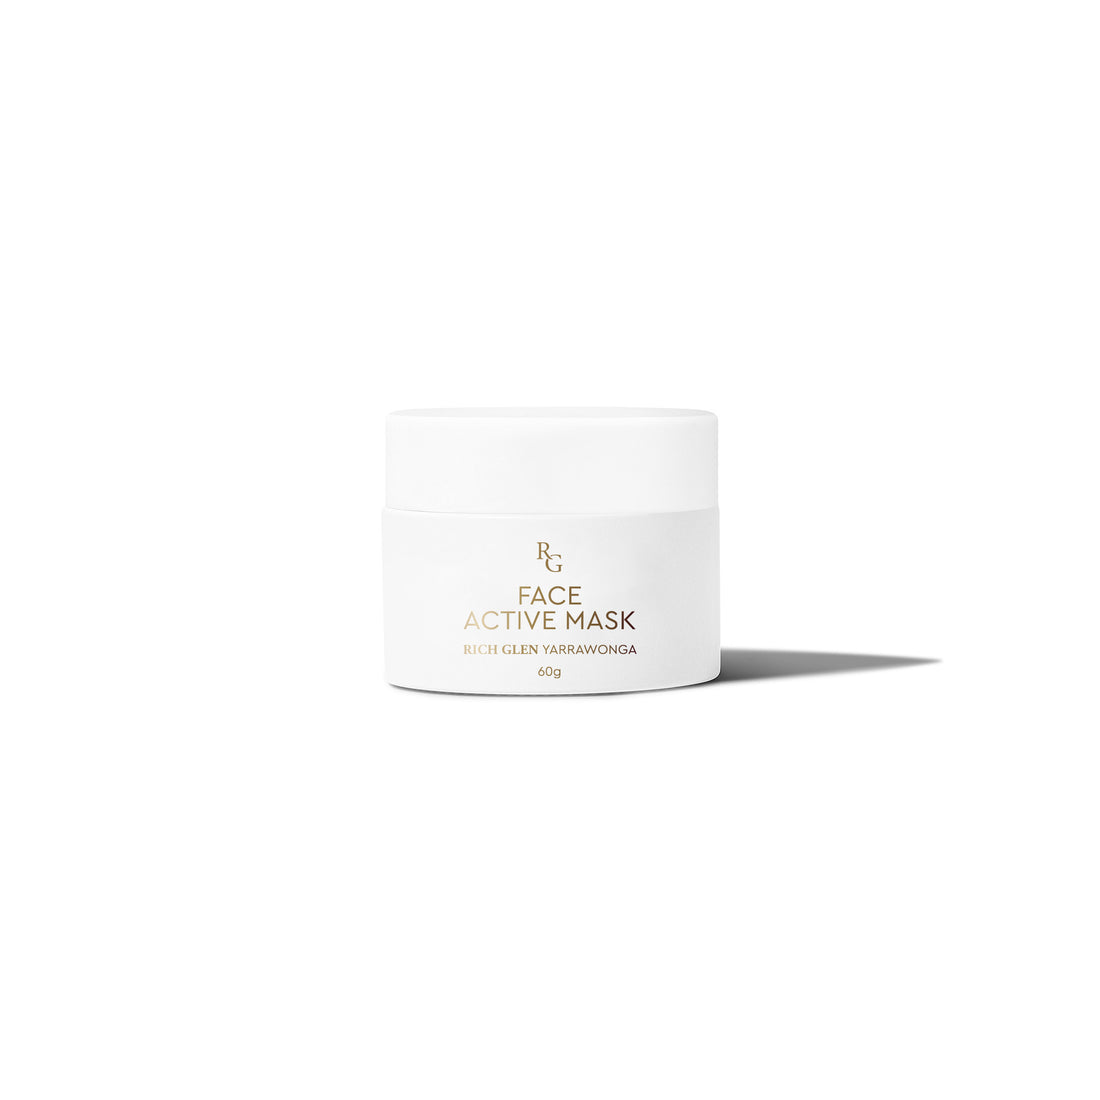 Face Active Mask